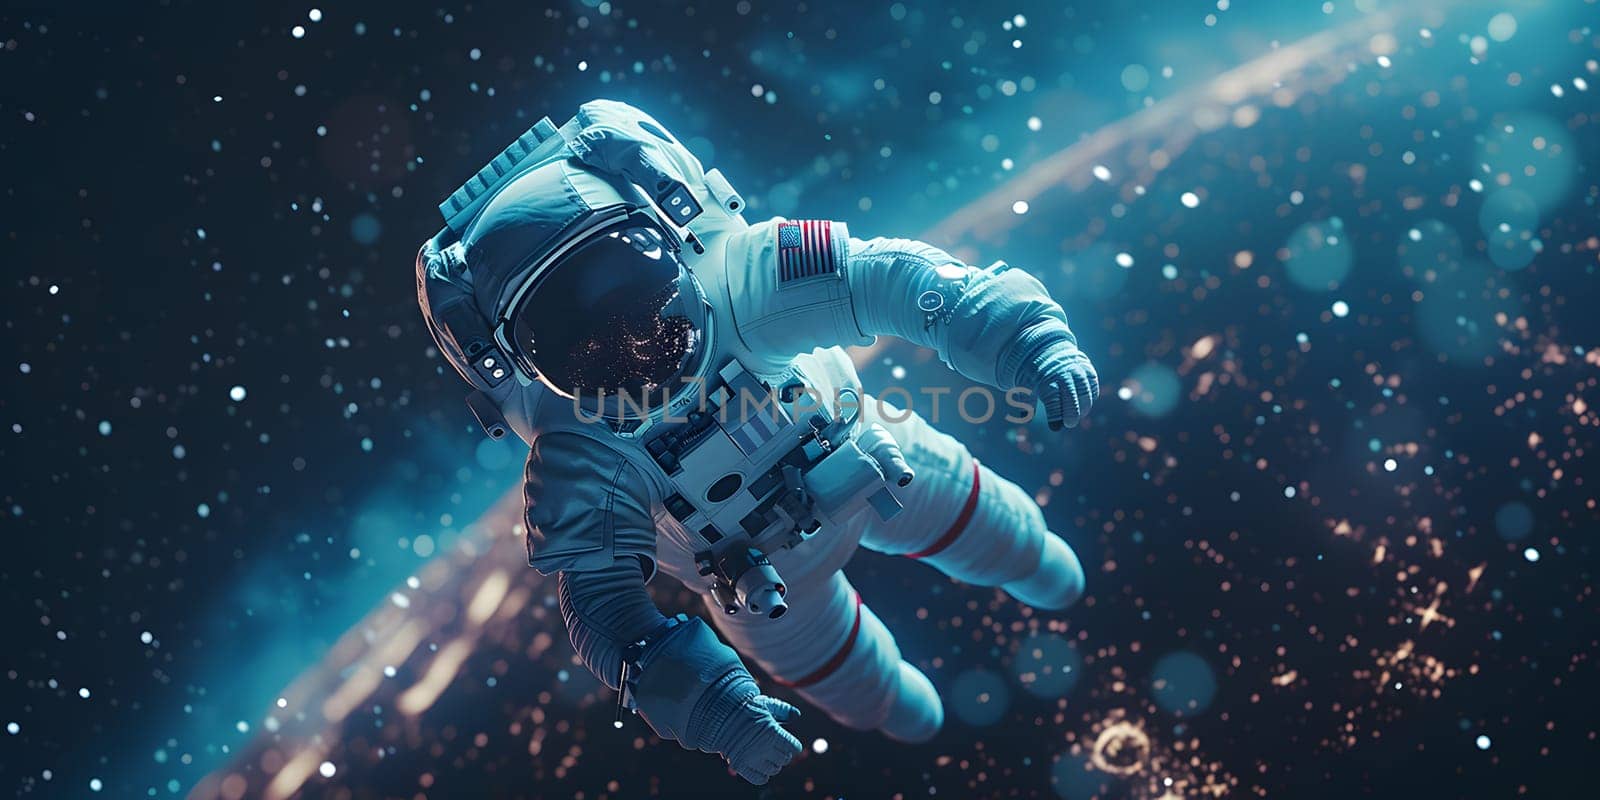 An astronaut floats in space in front of an electric blue planet by Nadtochiy